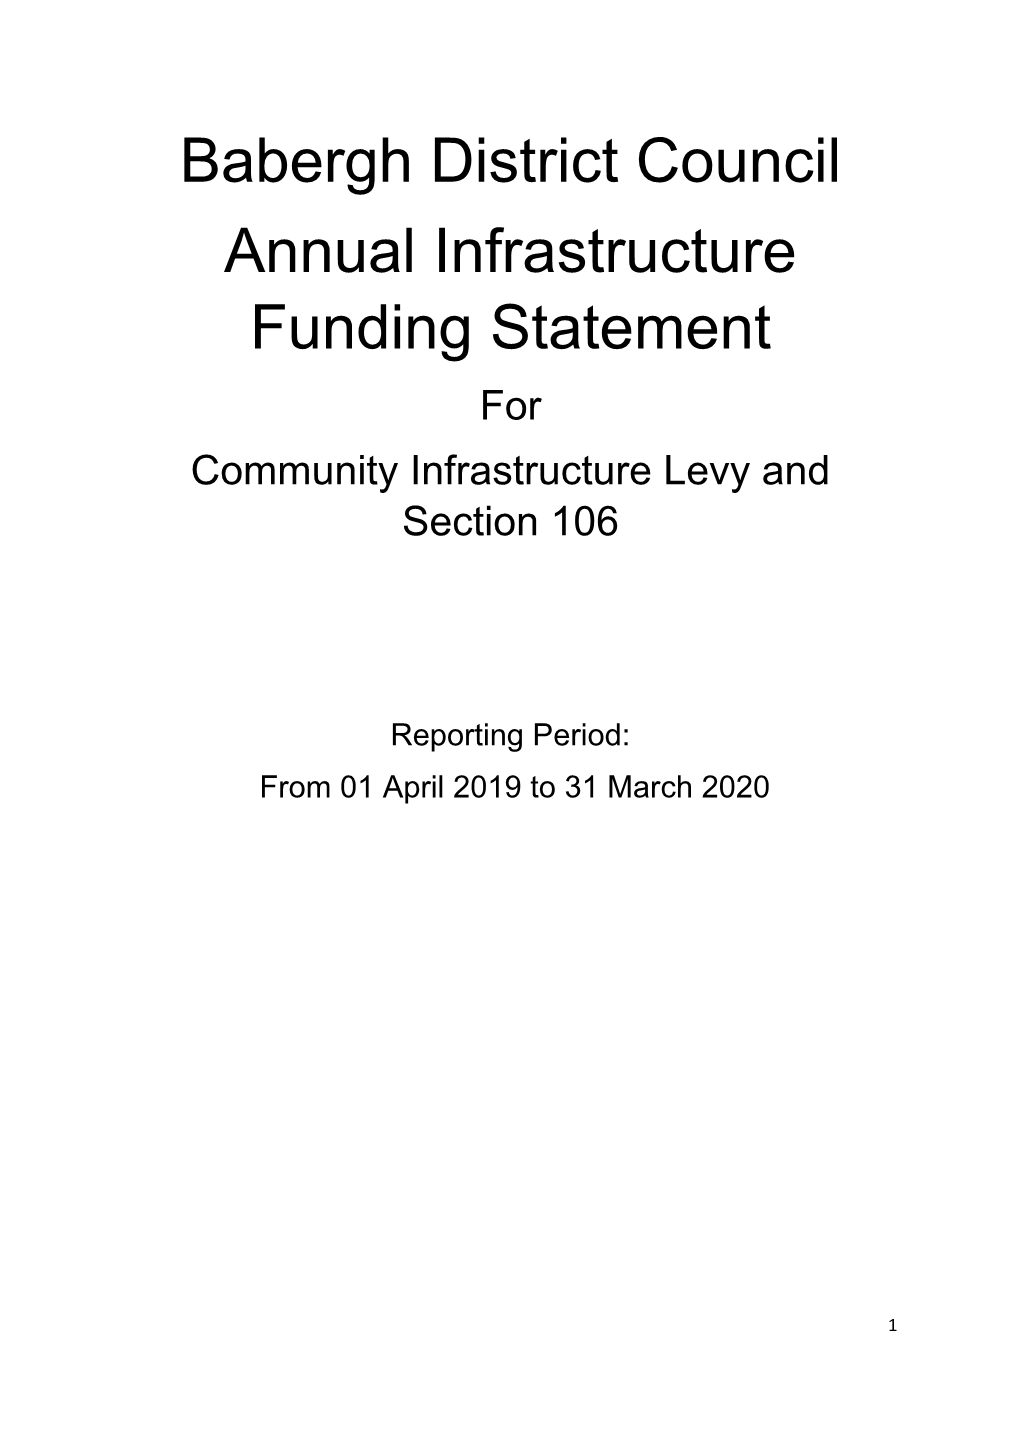 Babergh District Council Annual Infrastructure Funding Statement for Community Infrastructure Levy and Section 106